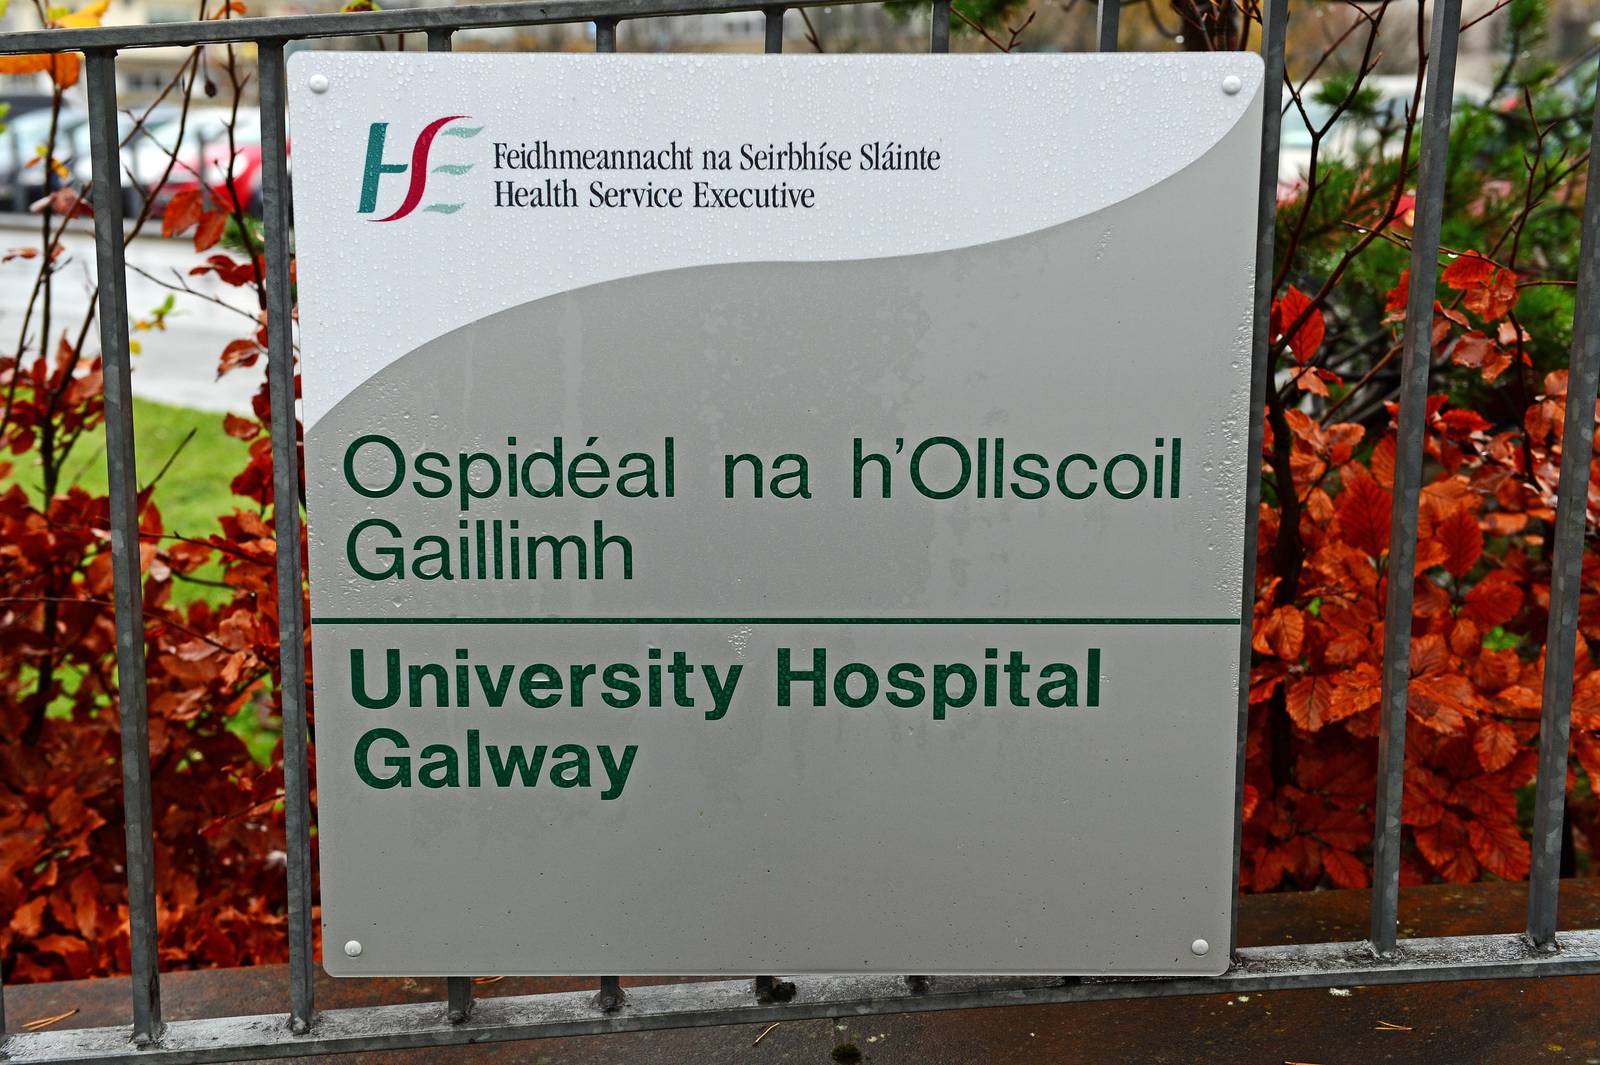 14/11/2012           NEWS        
University Hospital Galway 
Photograph: Eric Luke / THE IRISH TIMES 
Exterior  File  Stock   PLEASE FILE FOR FUTURE USE